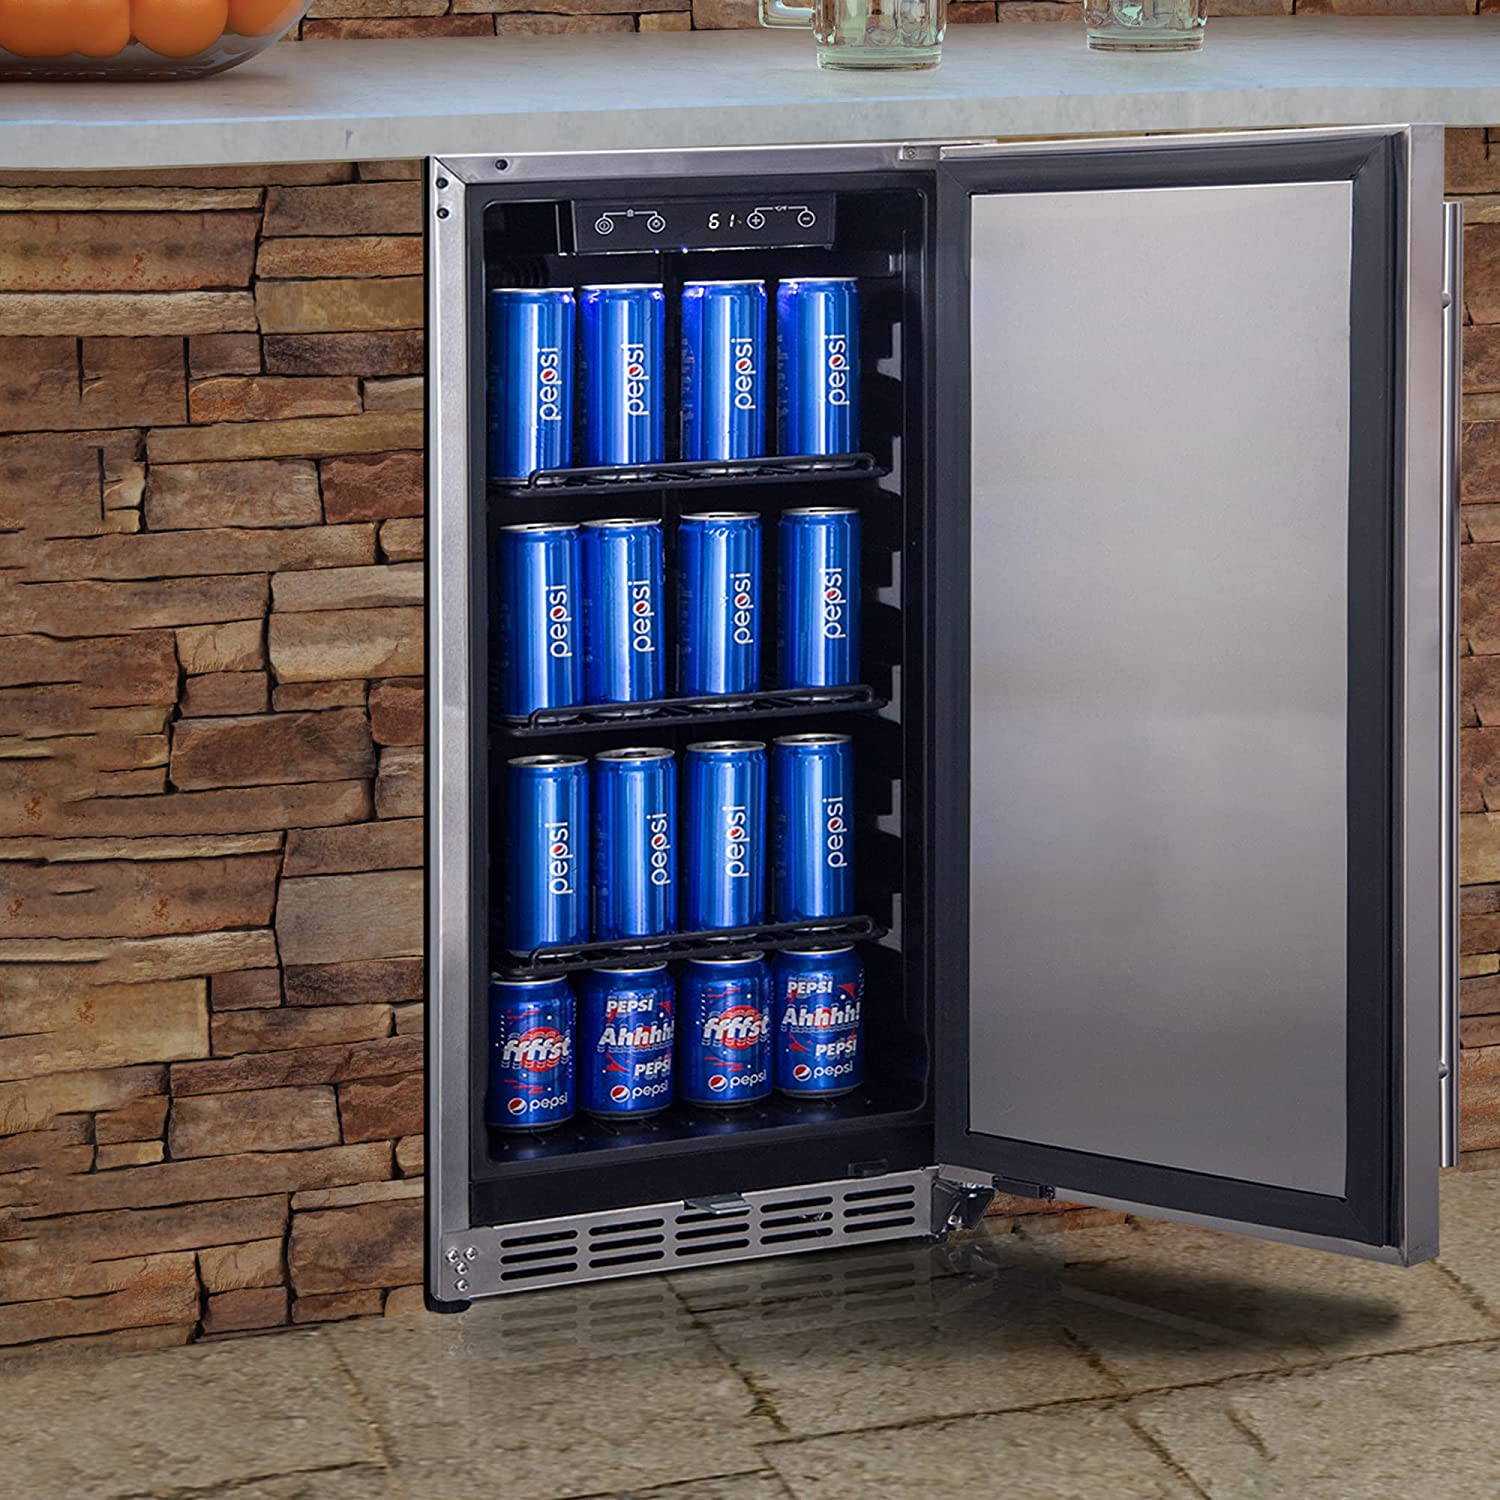 Side view of a 3.2 Cu Ft Black Outdoor Beverage Fridge 96 cans installed beneath an outdoor kitchen, door open, displaying interior space with a digital temperature control panel and fully stocked with beverage drinks.